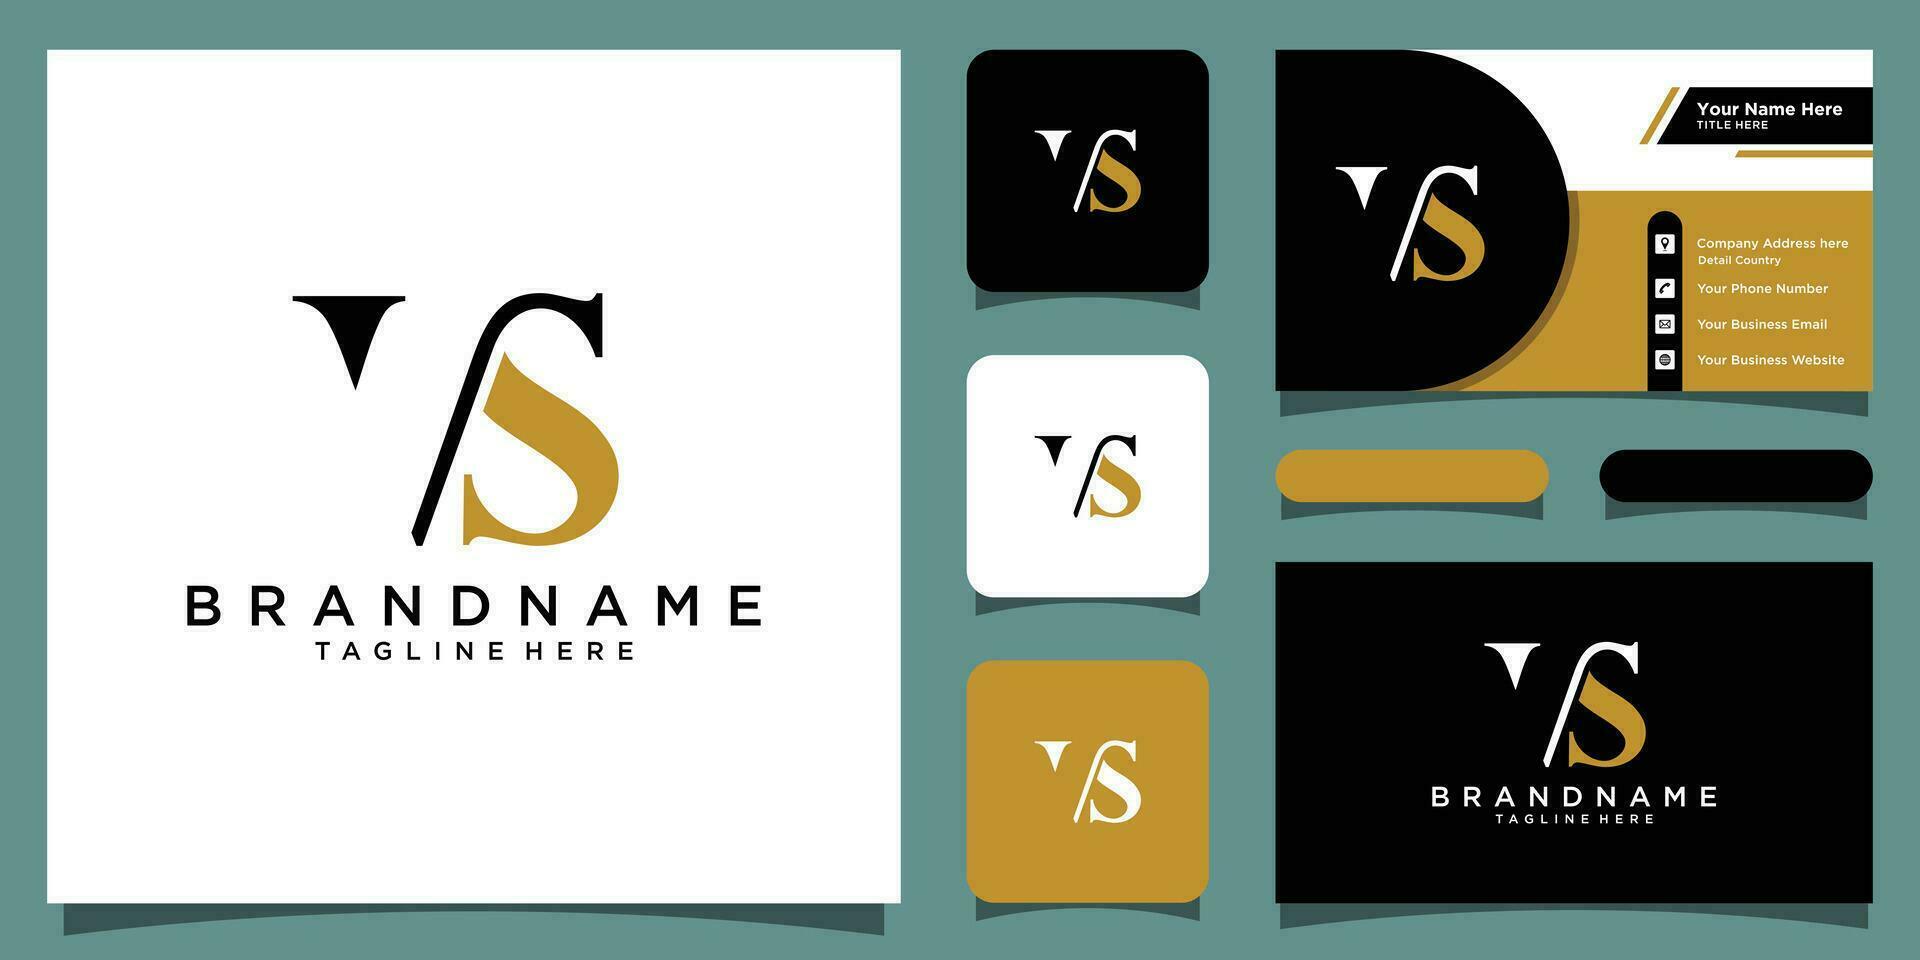 Initials Letter VS or SV Logo Designs Vector with business card design Premium Vector